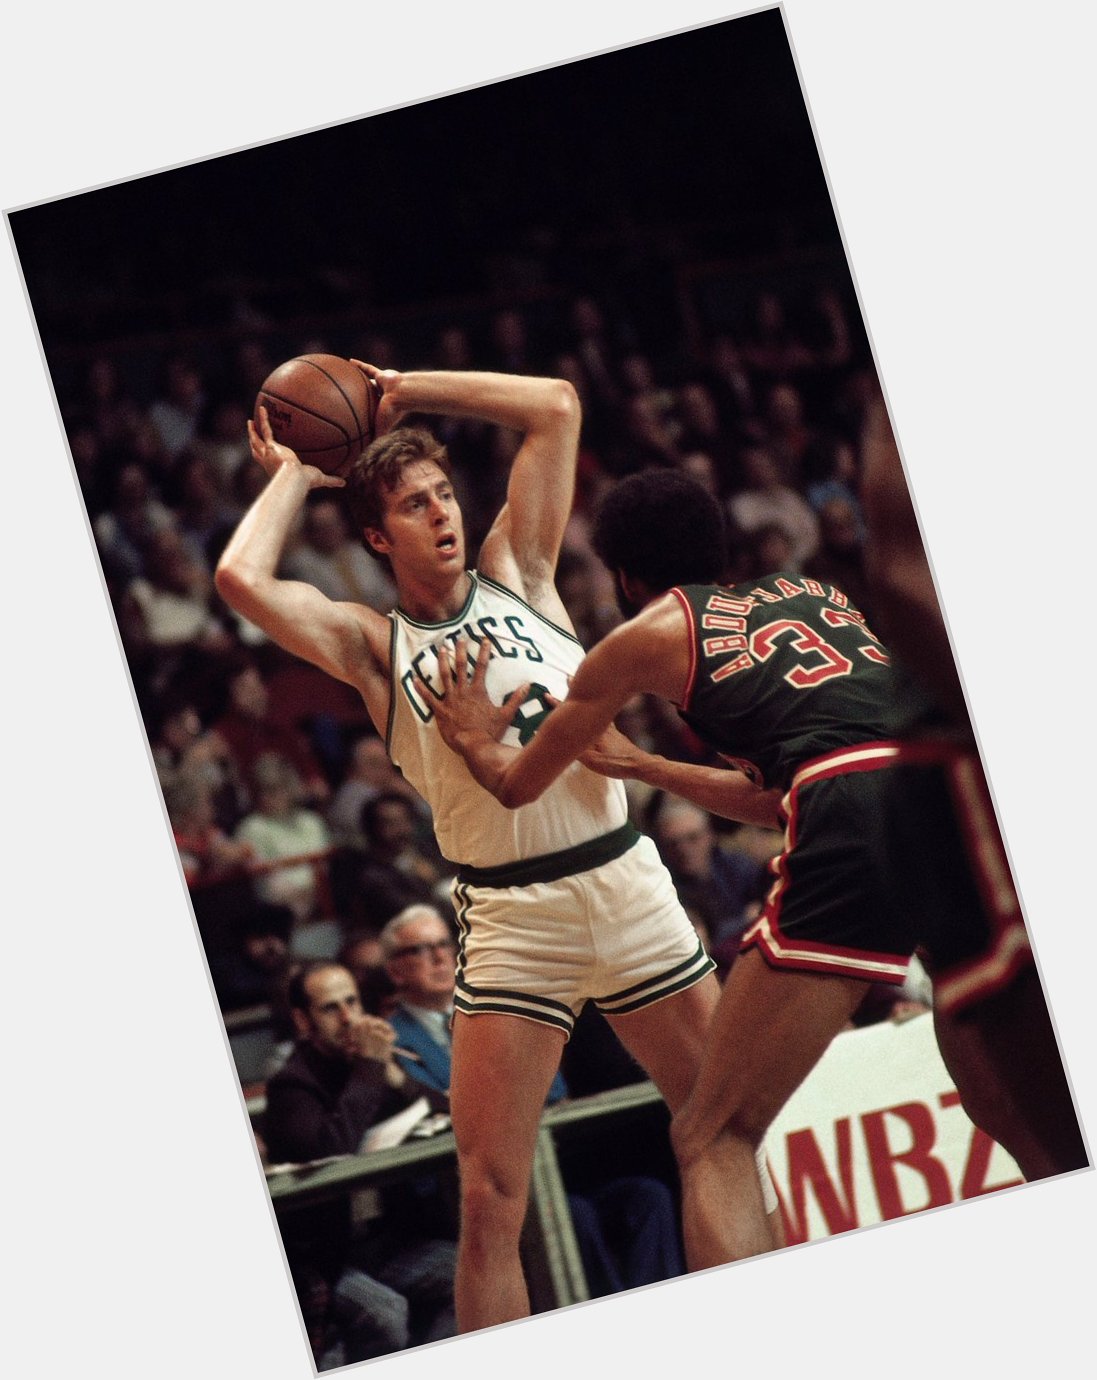 To wish Dave Cowens a Happy Birthday.  : Dick Raphael/NBAE via Getty Images 